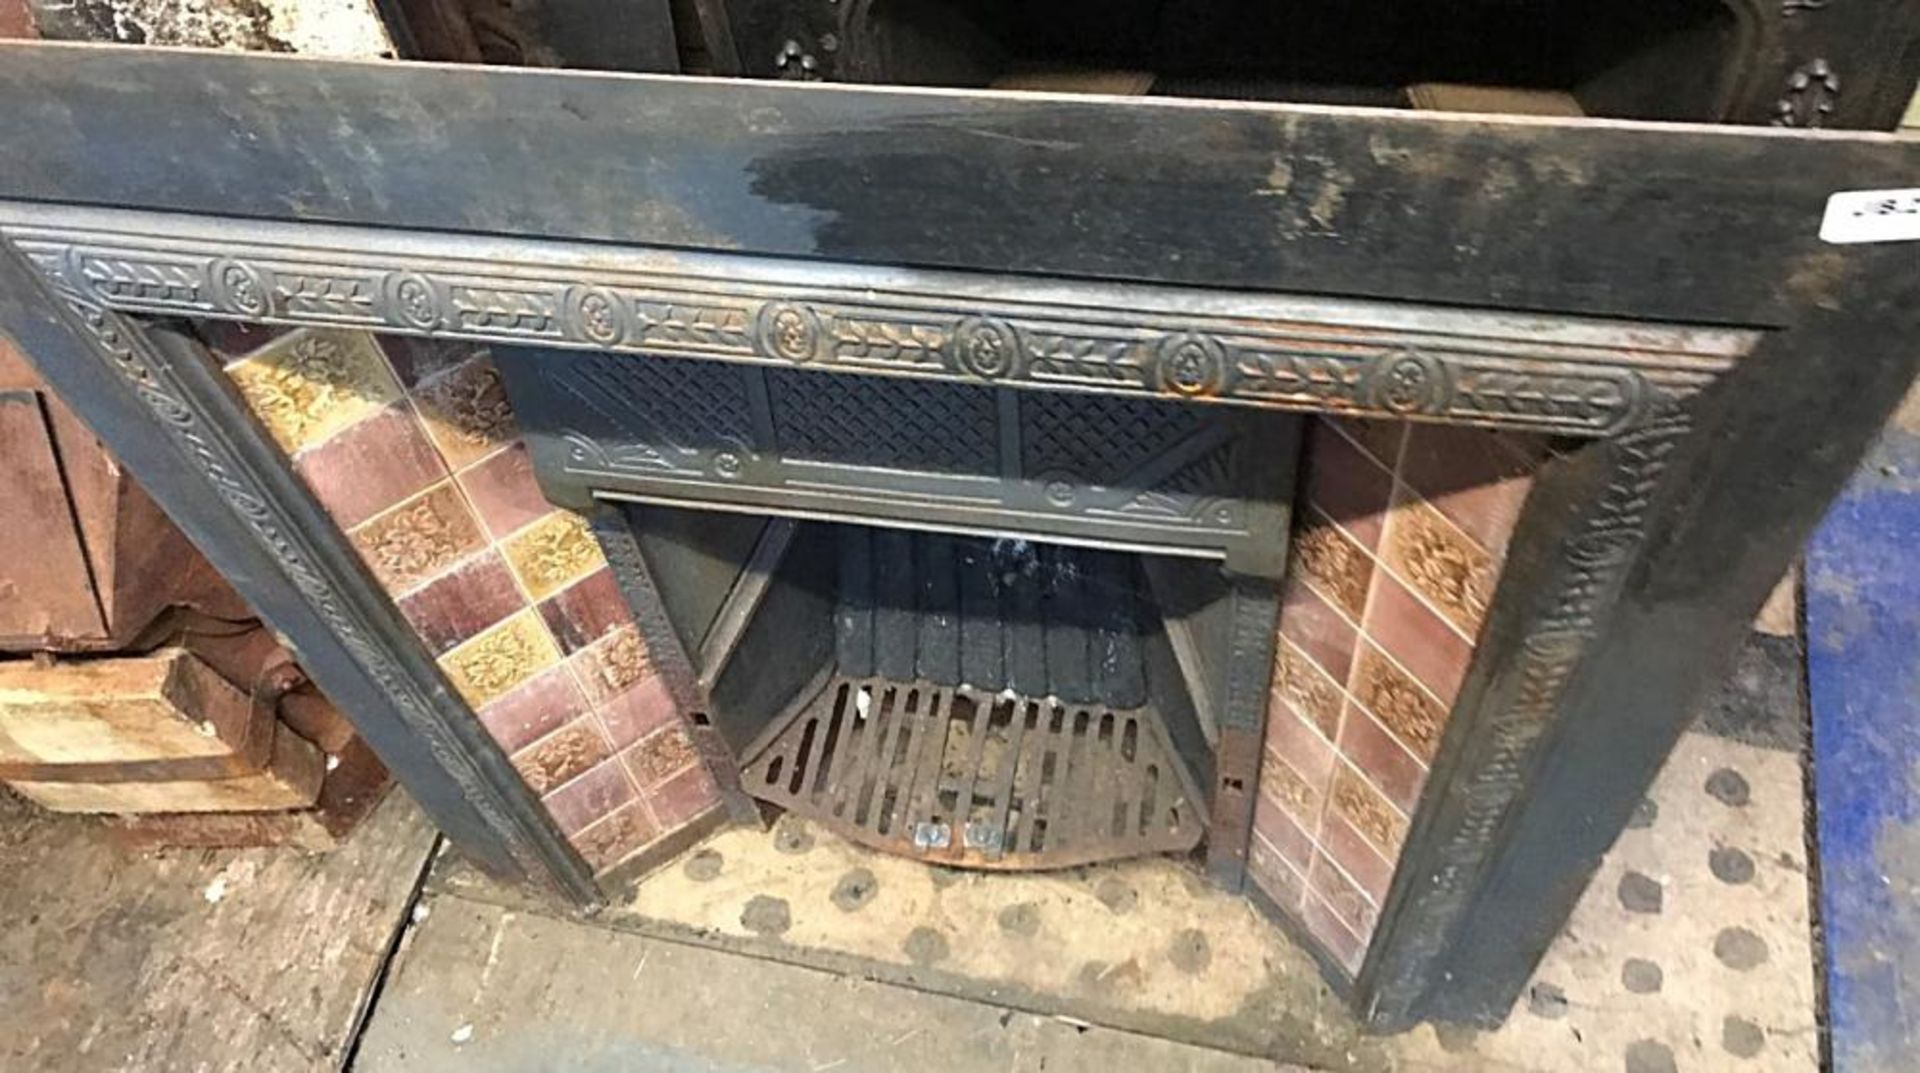 1 x Antique Victorian Cast Iron Fire Insert With Patterned Tiles To Sides - Dimensions: width 92cm x - Image 2 of 4